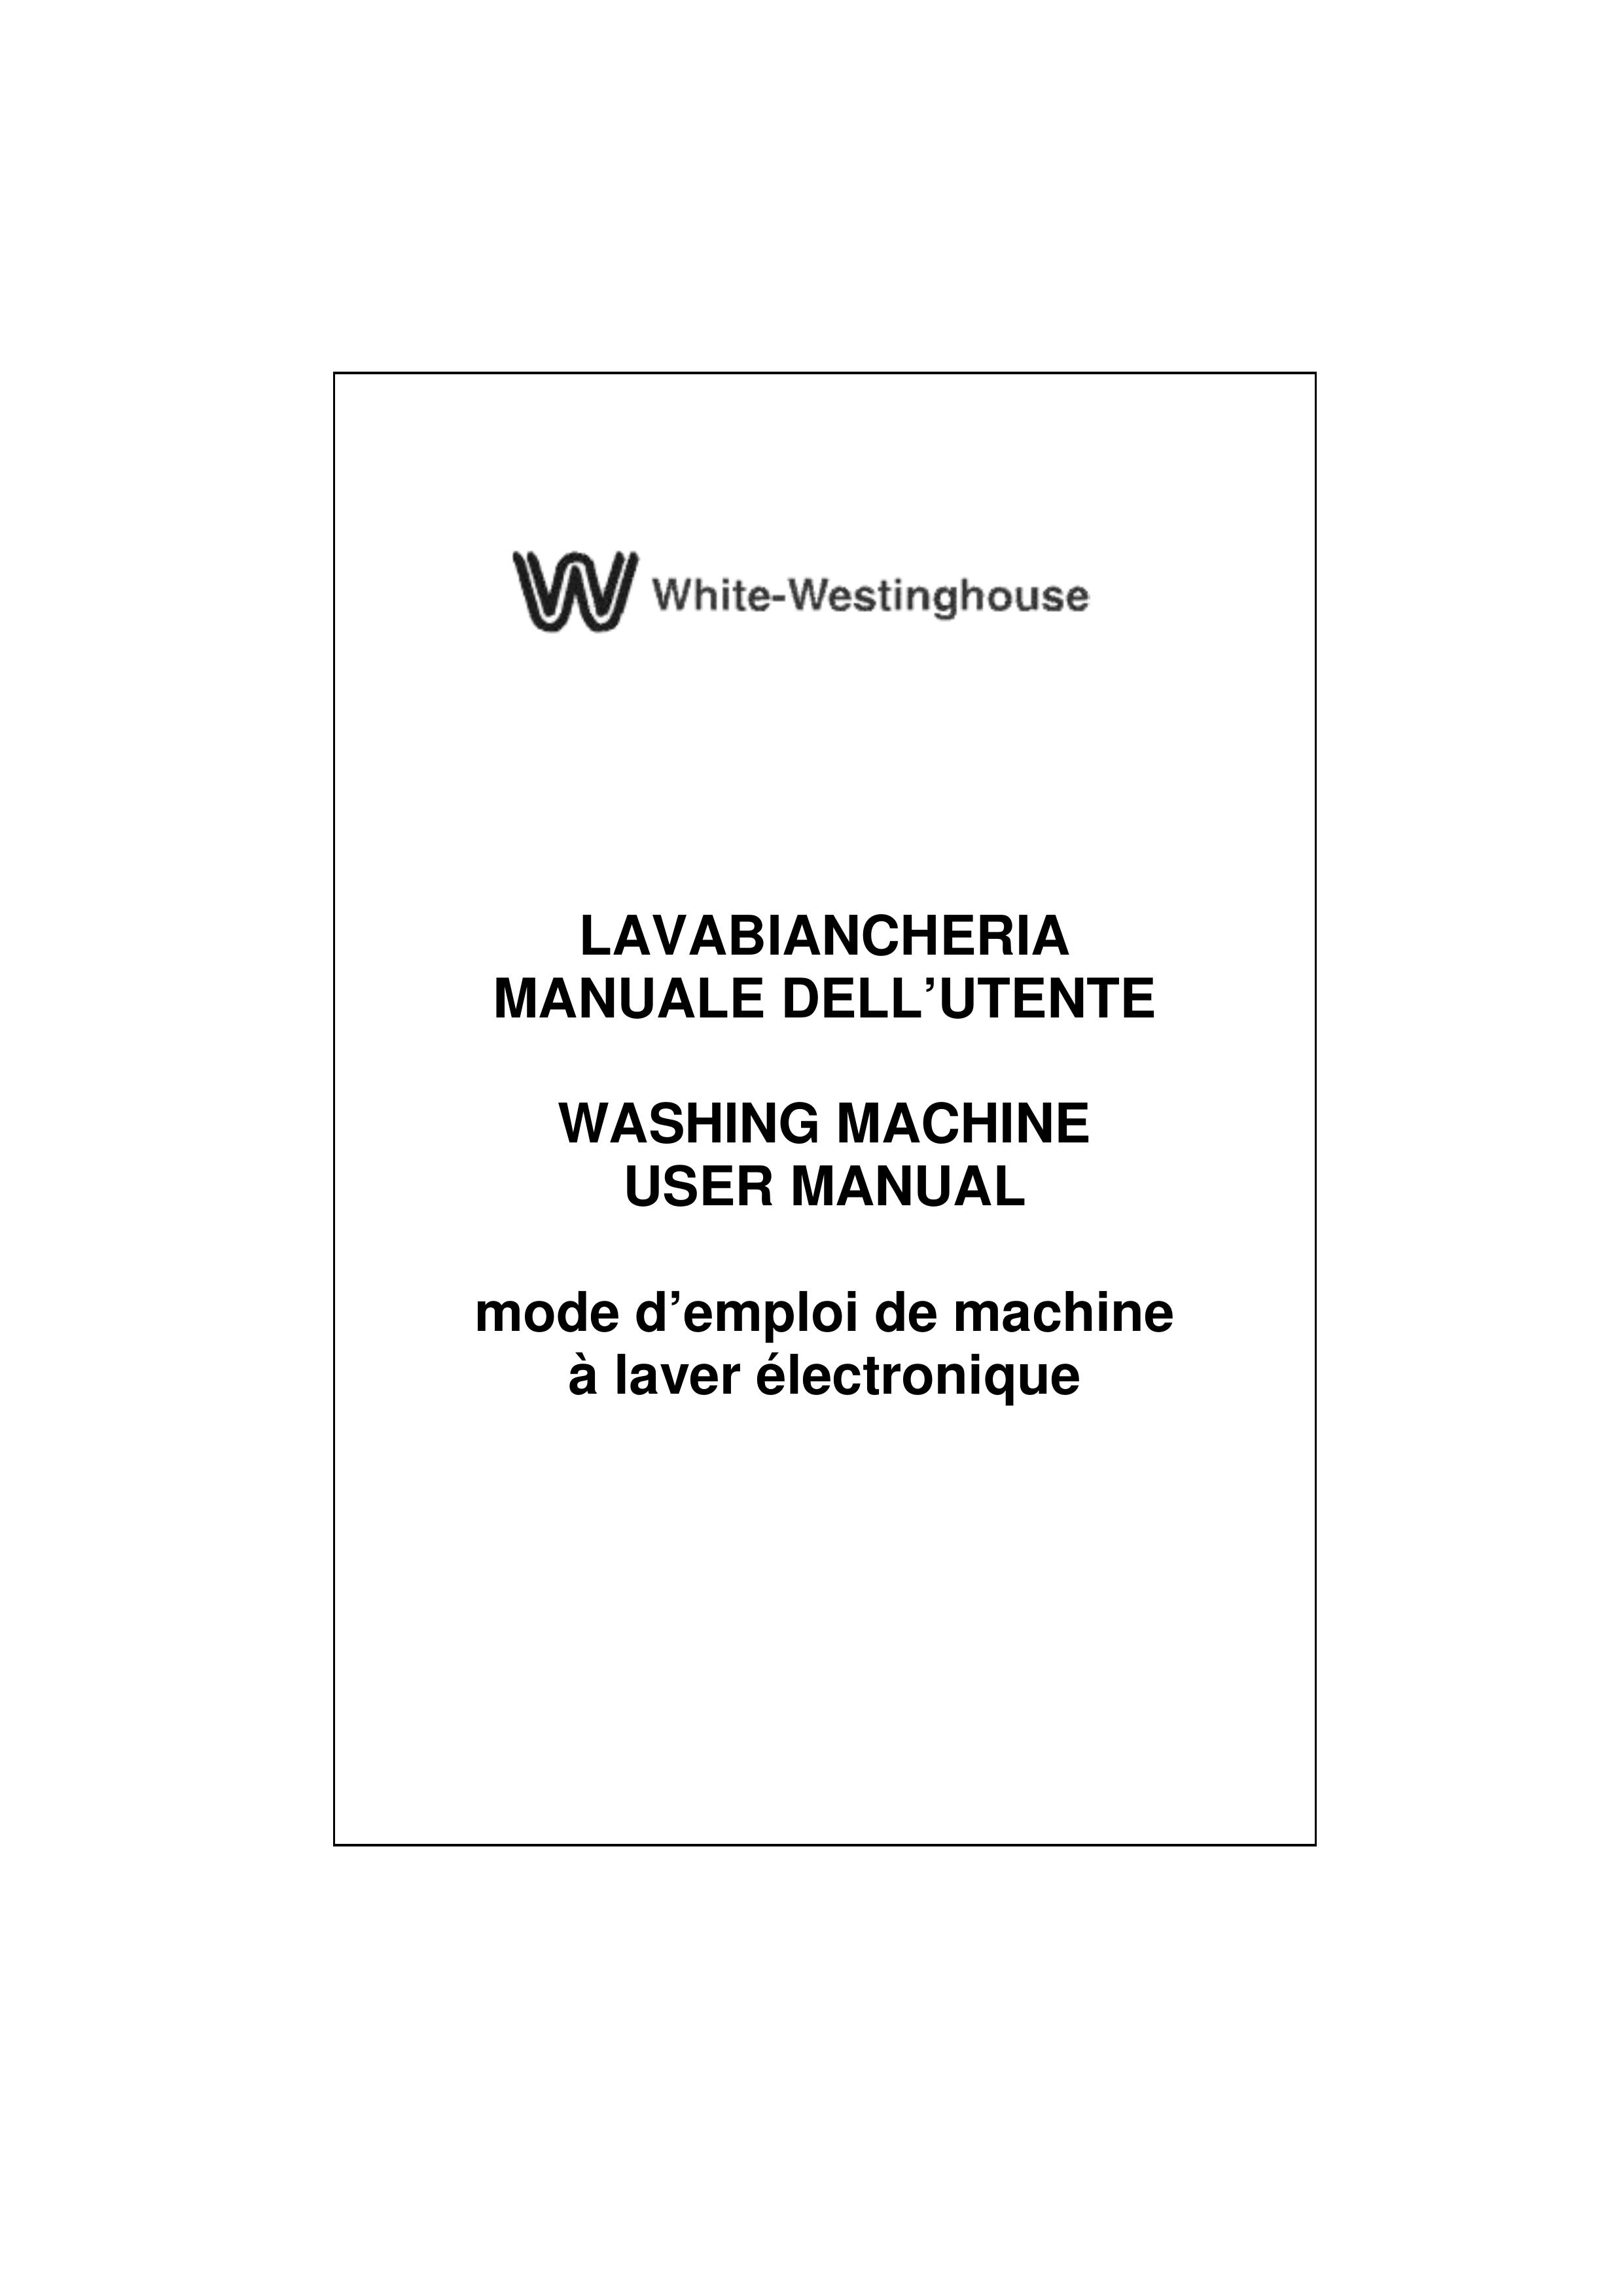 White-Westinghouse WM50T-1 Washer User Manual